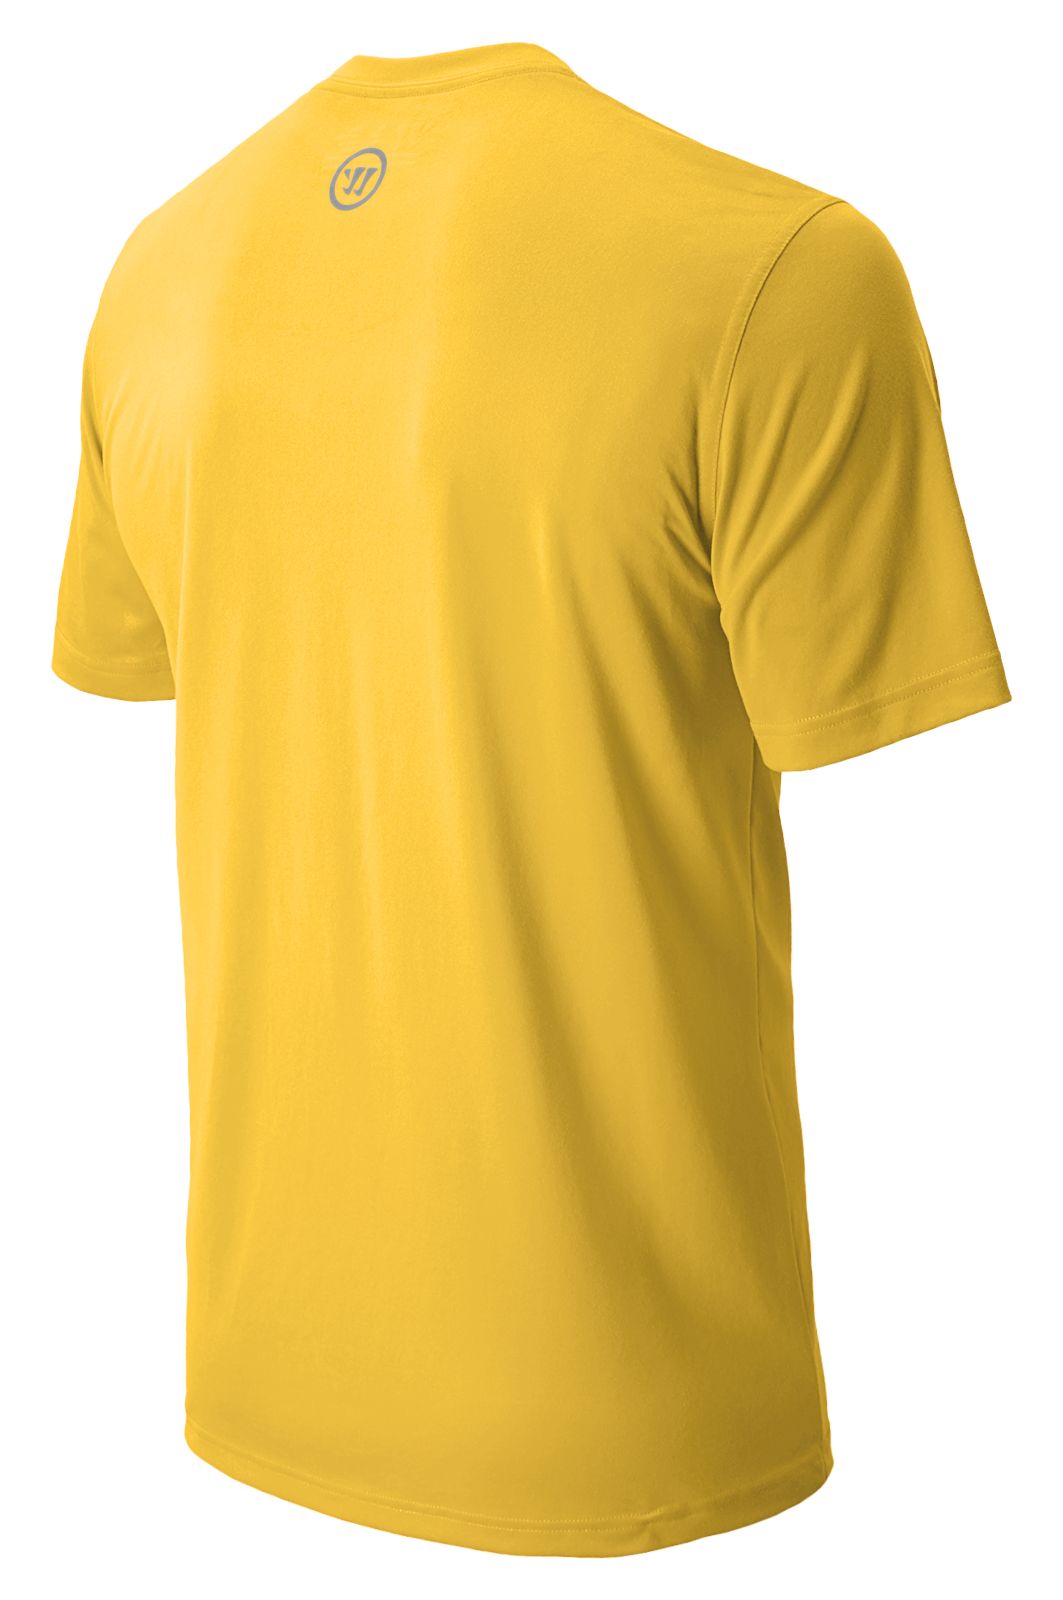 Wartech Tee SS, Athletic Gold image number 0